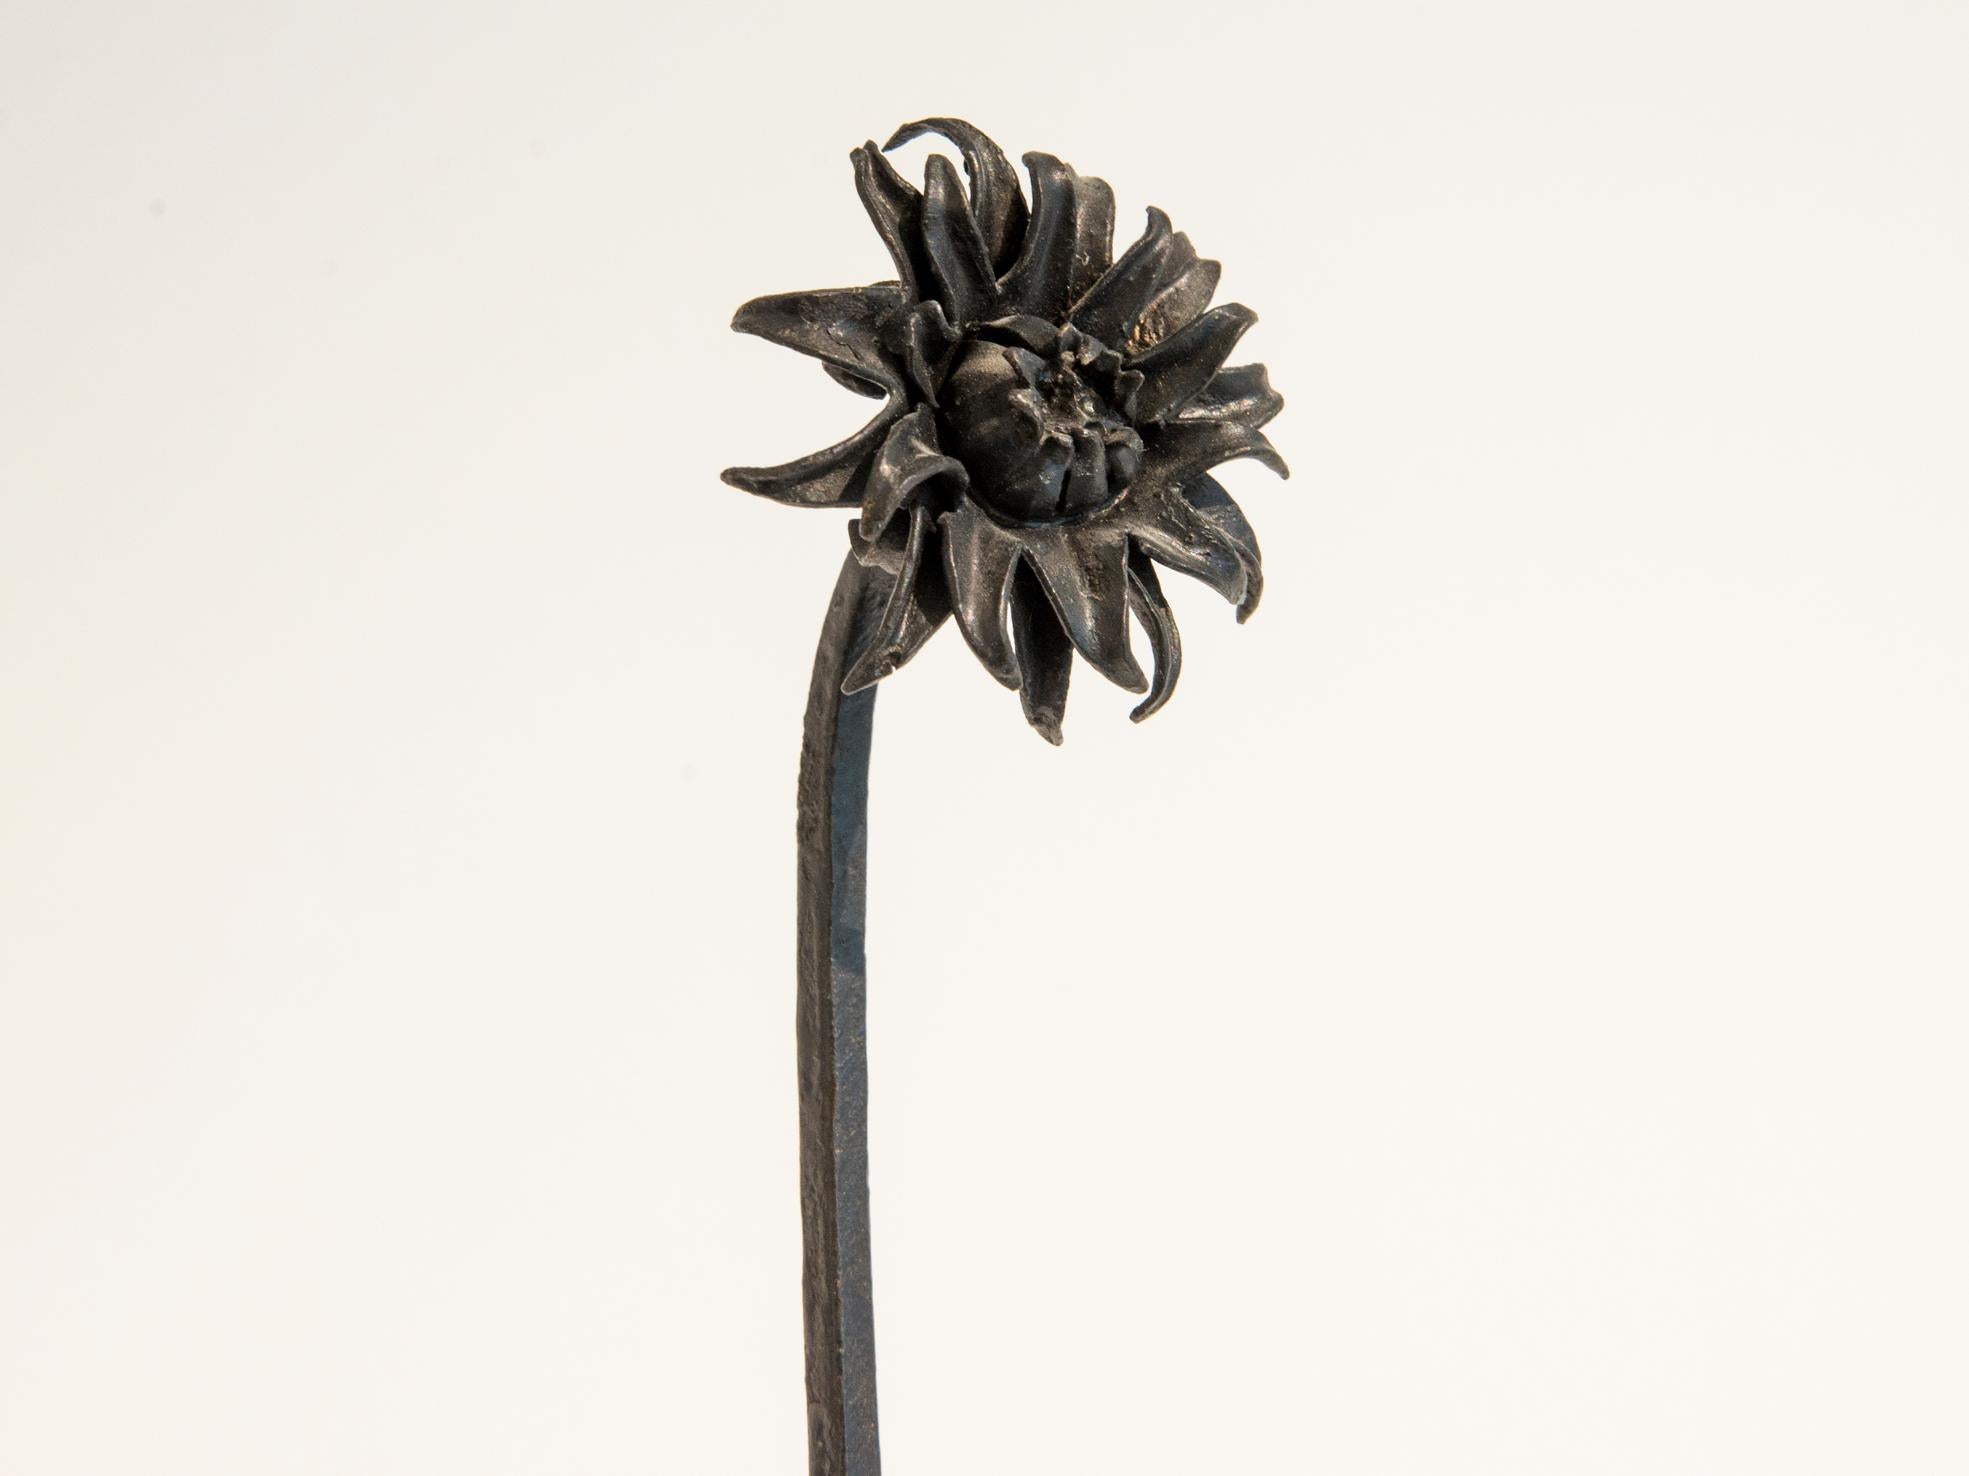 Alessandro Mazzucotelli ( Italy , 1865 - 1938 )
Flower
Sculpture representing a flower
Wrought iron
Italy, circa 1910
H 51 x D 11 cm